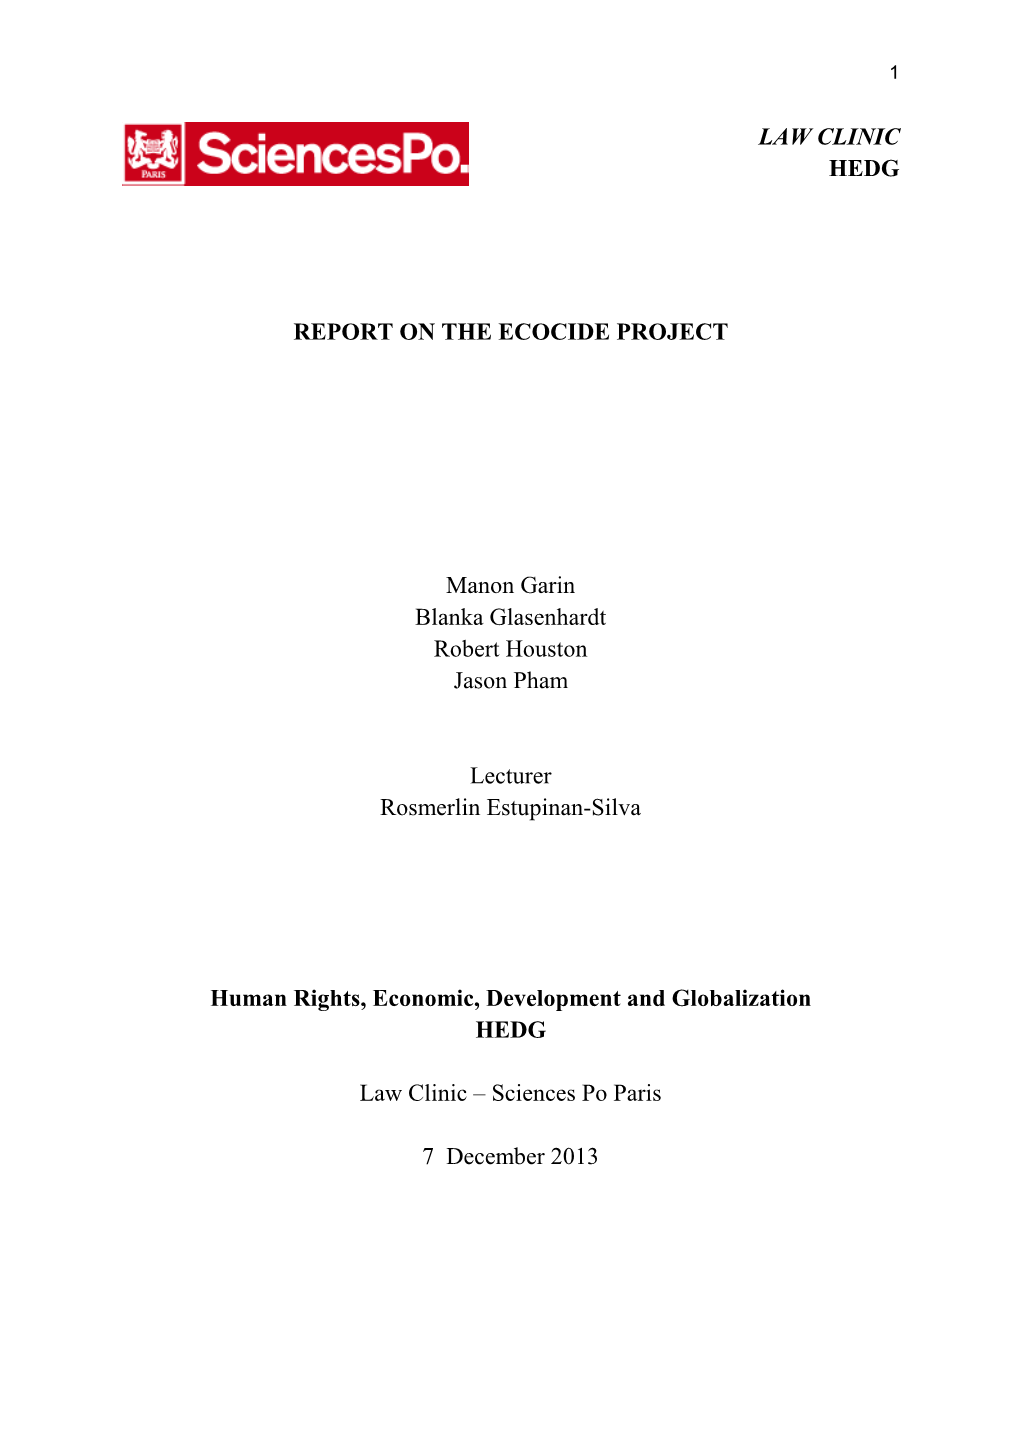 HEDG- Sciences Po Report on Ecocide 7-12-2013